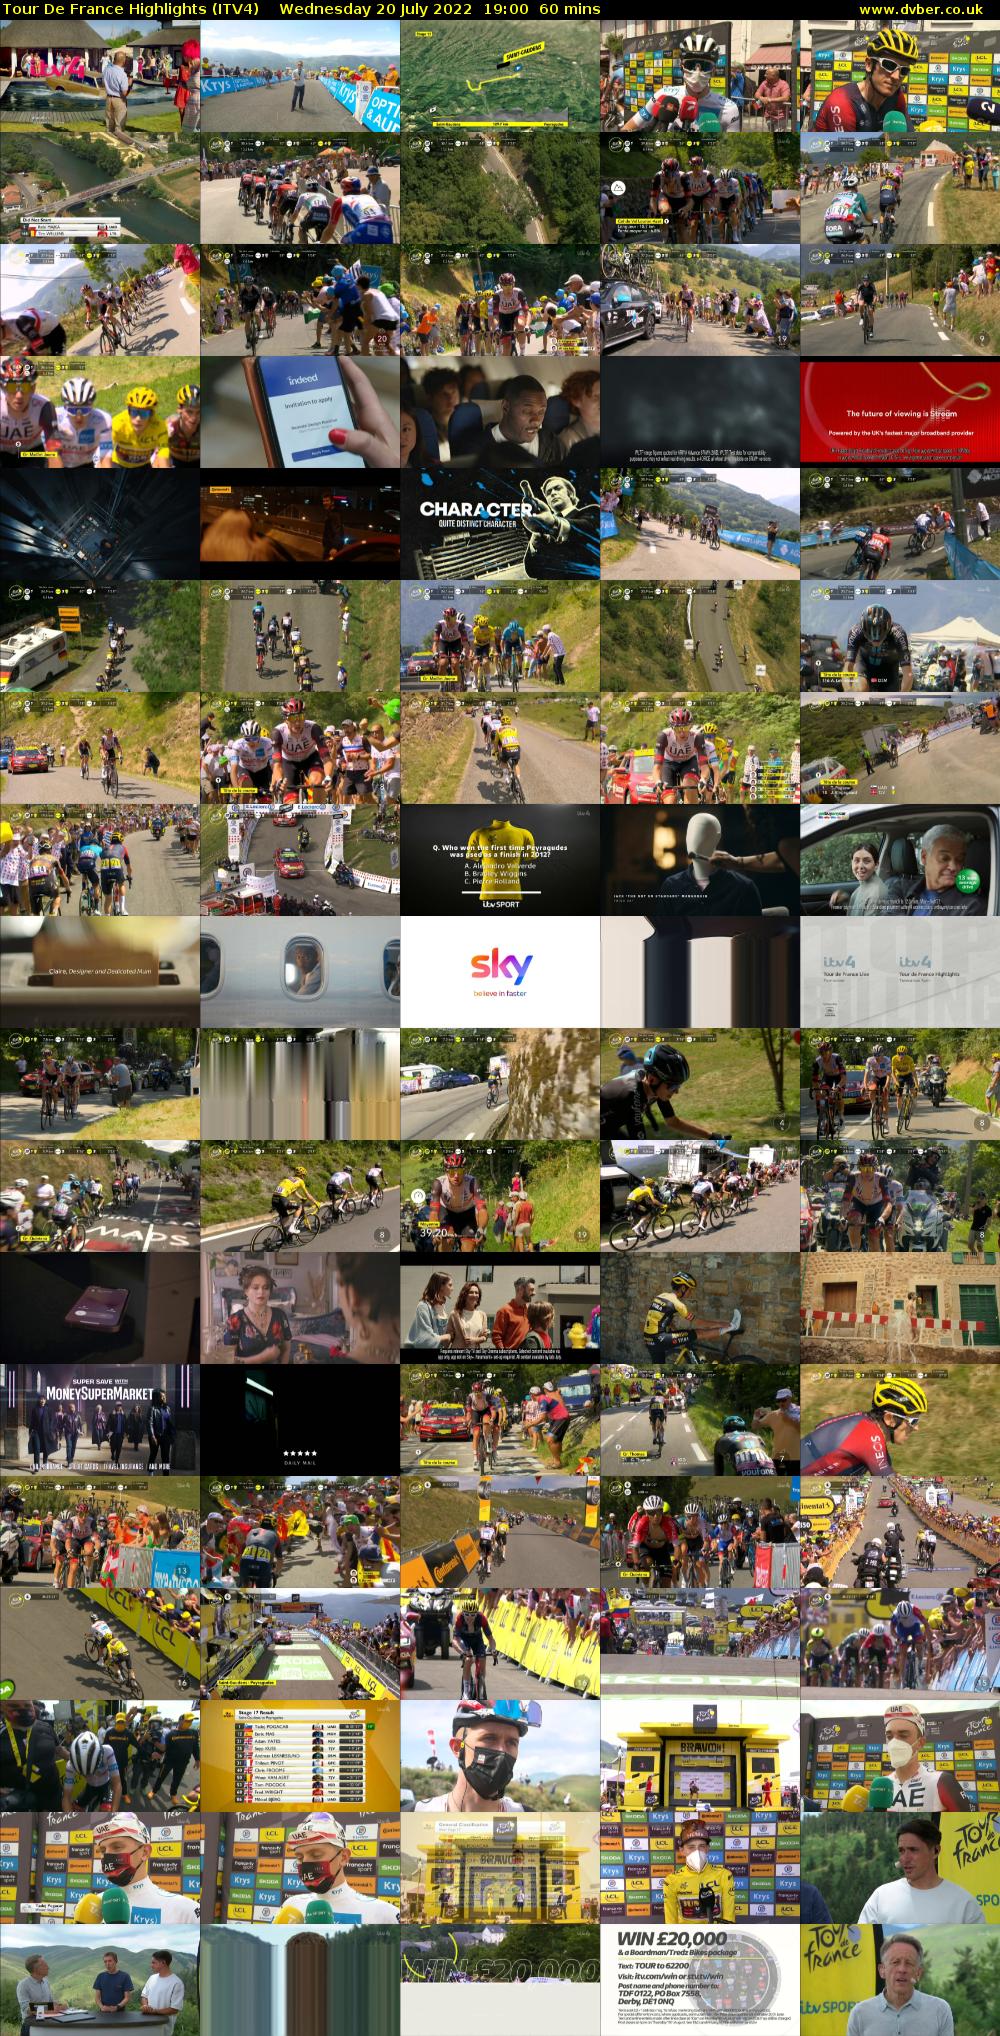 Tour De France Highlights (ITV4) Wednesday 20 July 2022 19:00 - 20:00